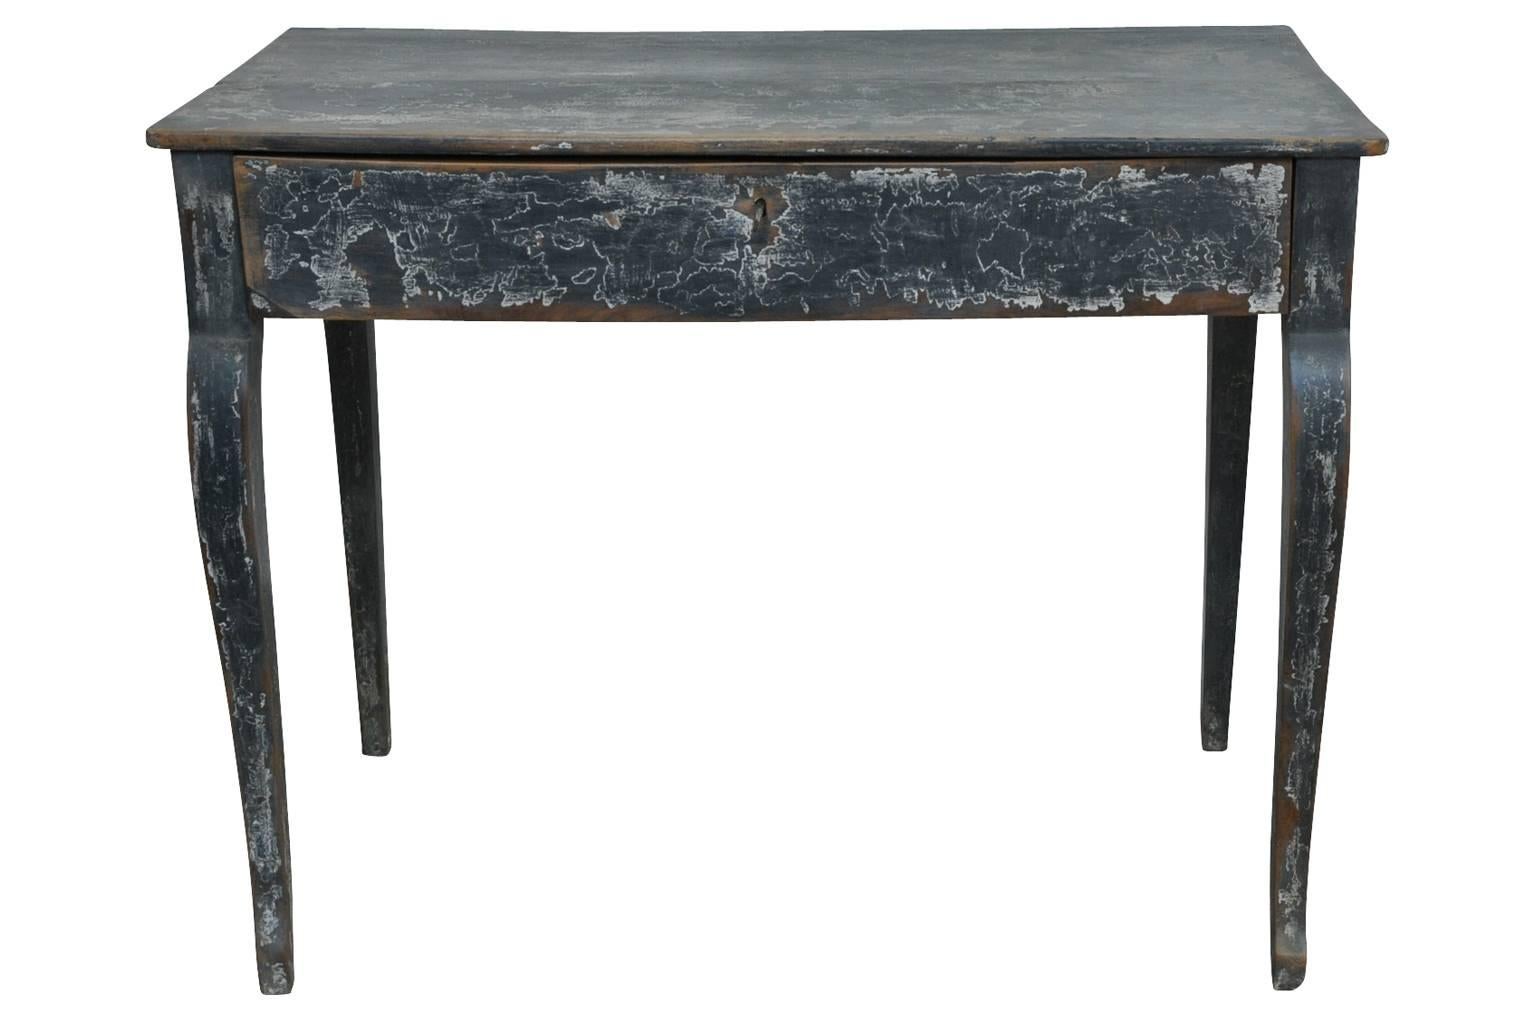 A very charming later 19th century small desk or side table in painted wood. Wonderful painted finish a great patina. One drawer over gentle cabriole legs. A perfect bedside table as well.